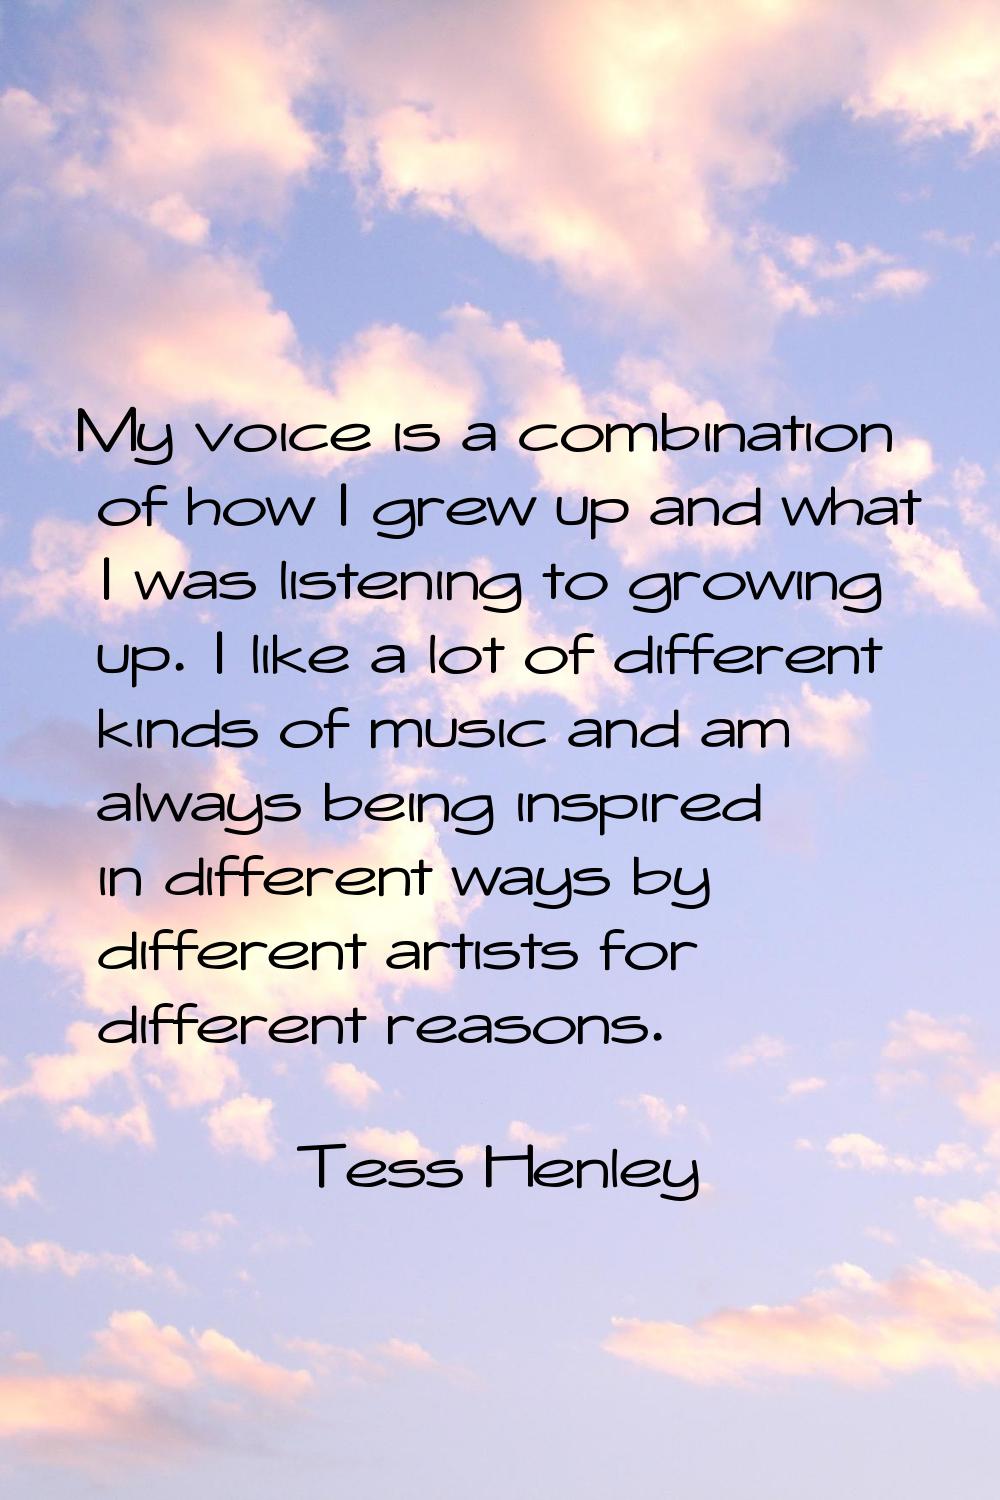 My voice is a combination of how I grew up and what I was listening to growing up. I like a lot of 